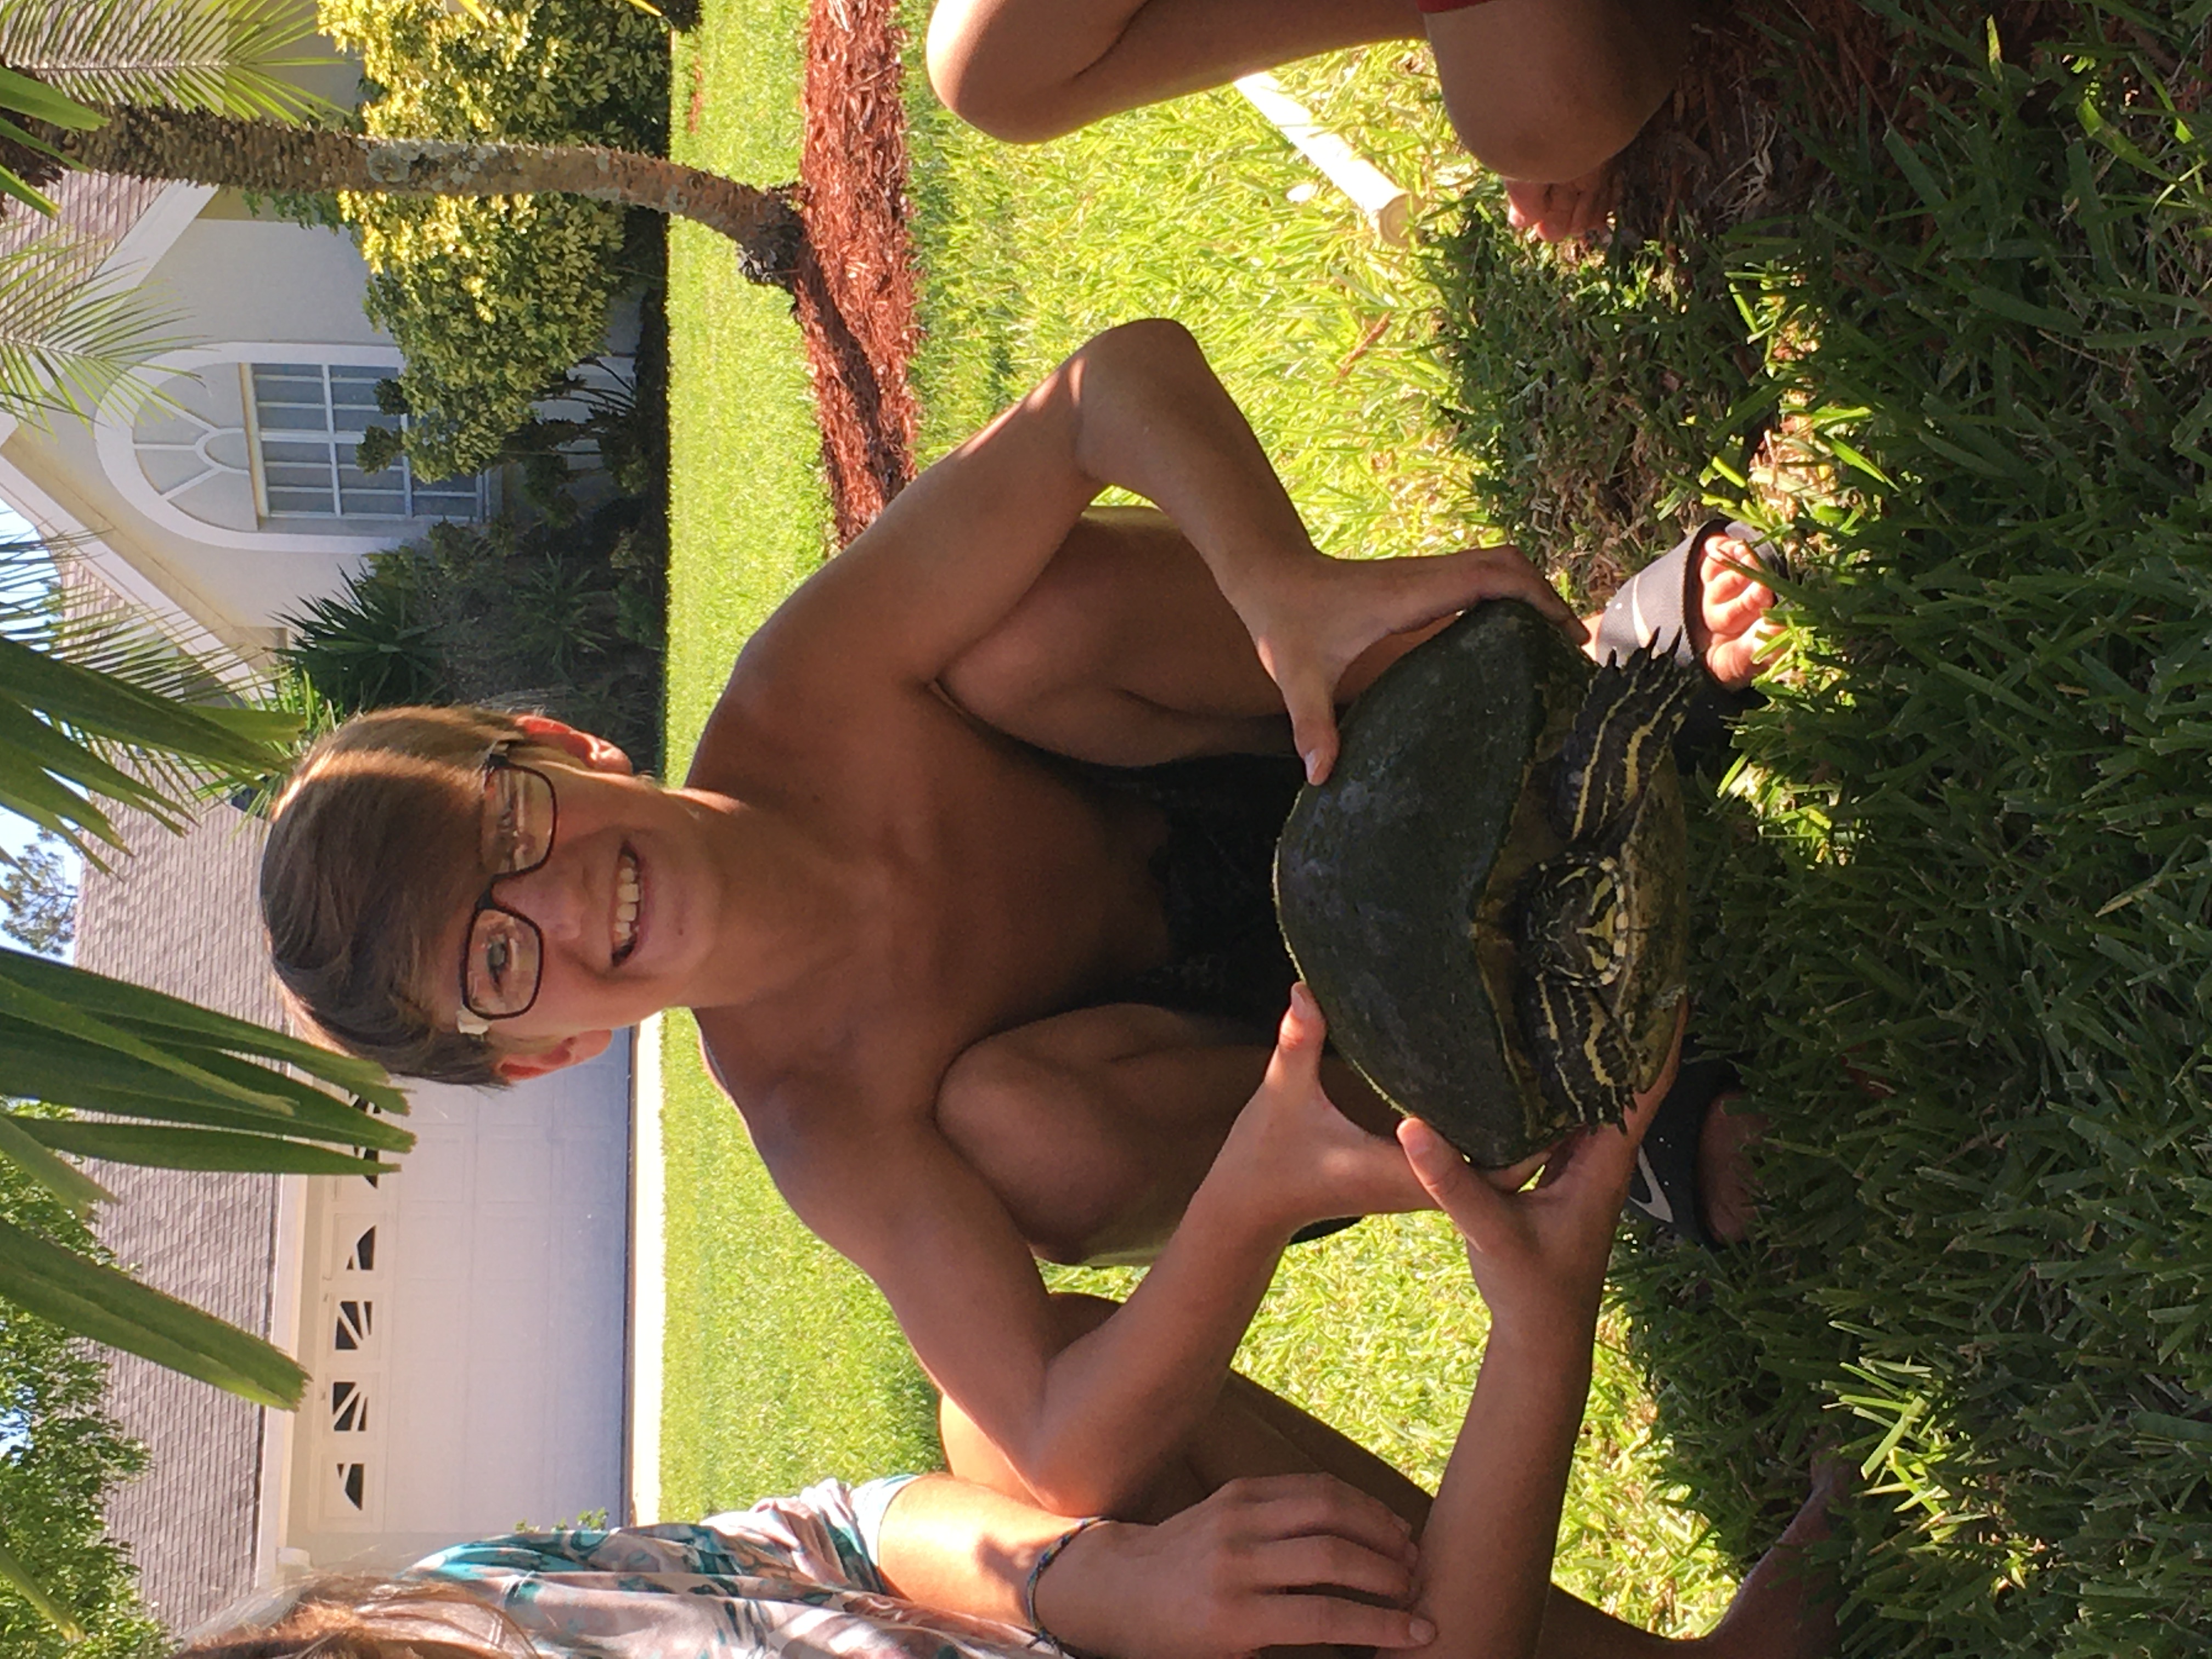 This is me holding a turtle